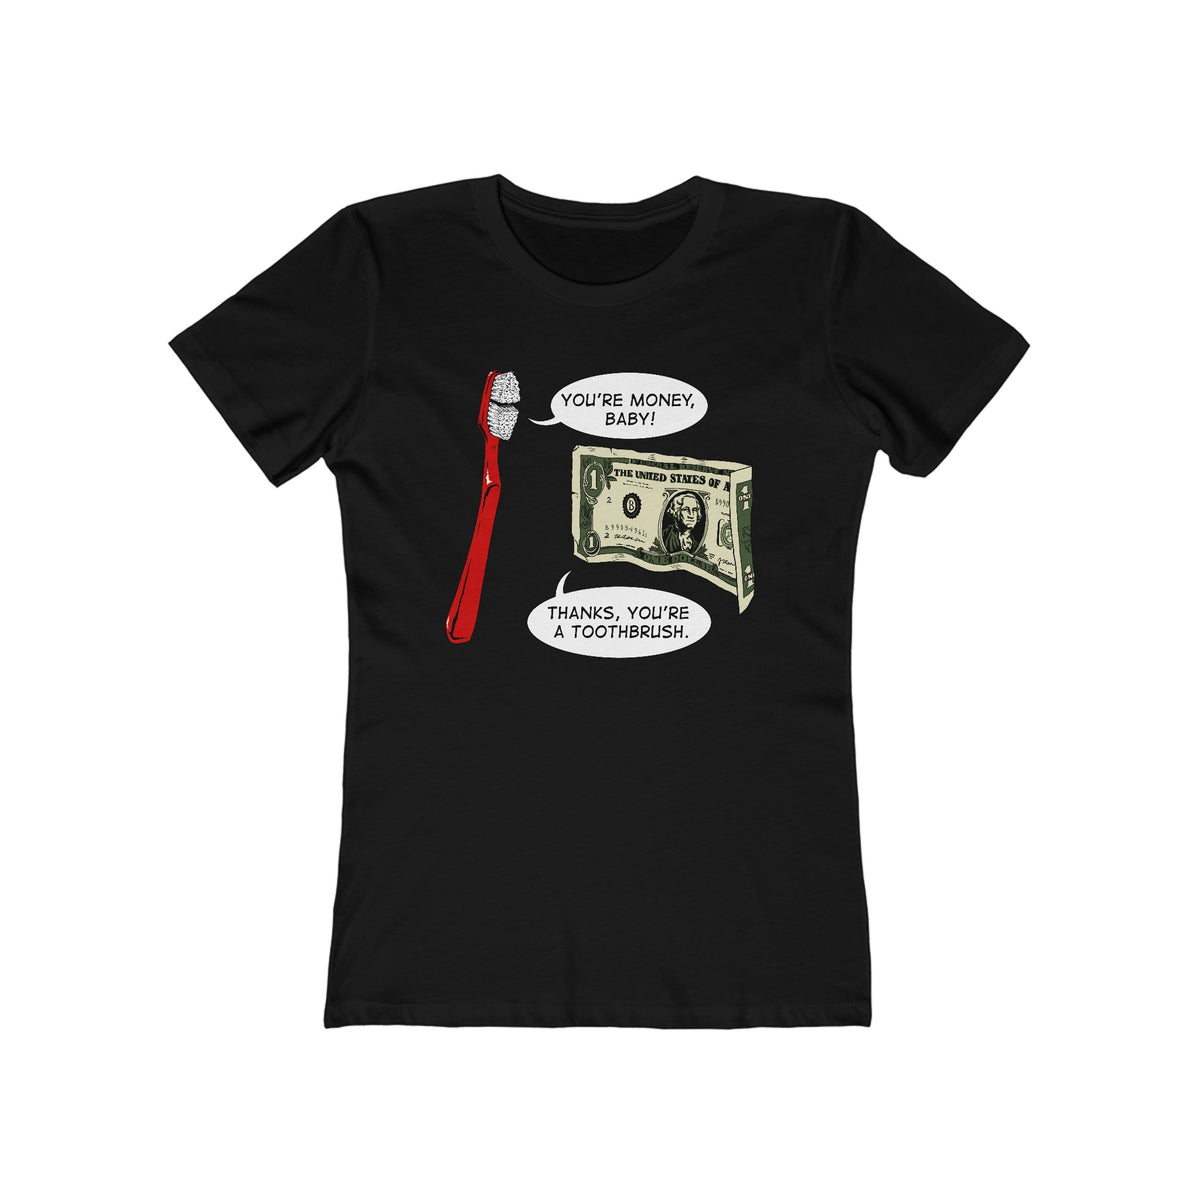 You're Money Baby! Thanks You're A Toothbrush. - Women’s T-Shirt